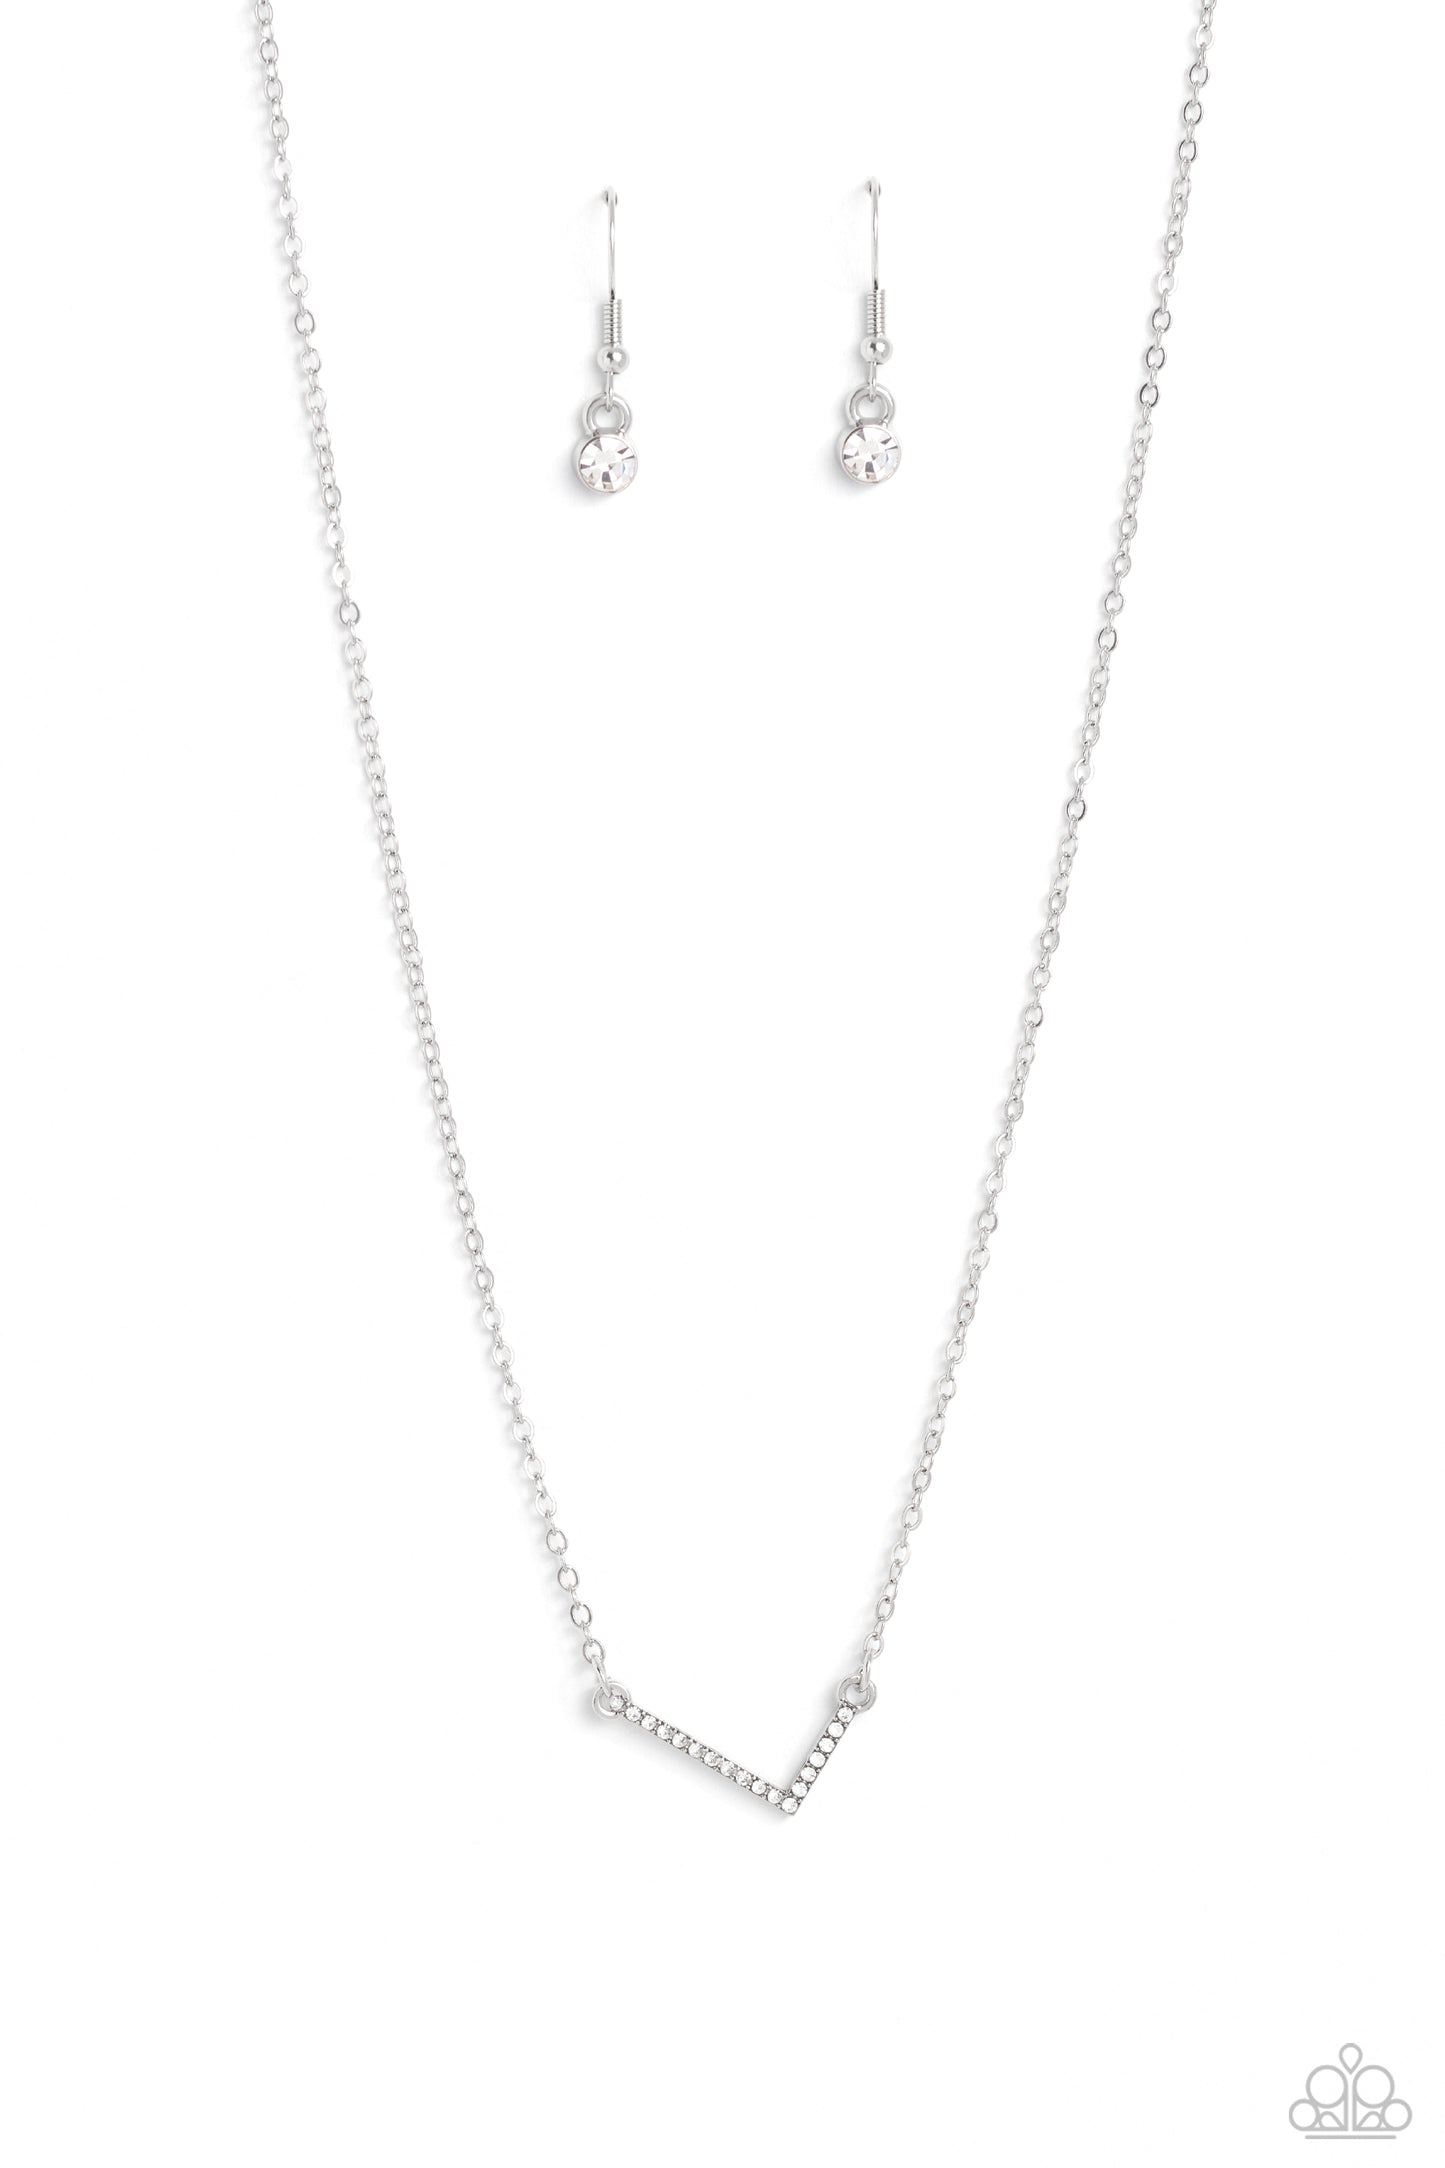 INITIALLY Yours White "L" Necklace - Paparazzi Accessories